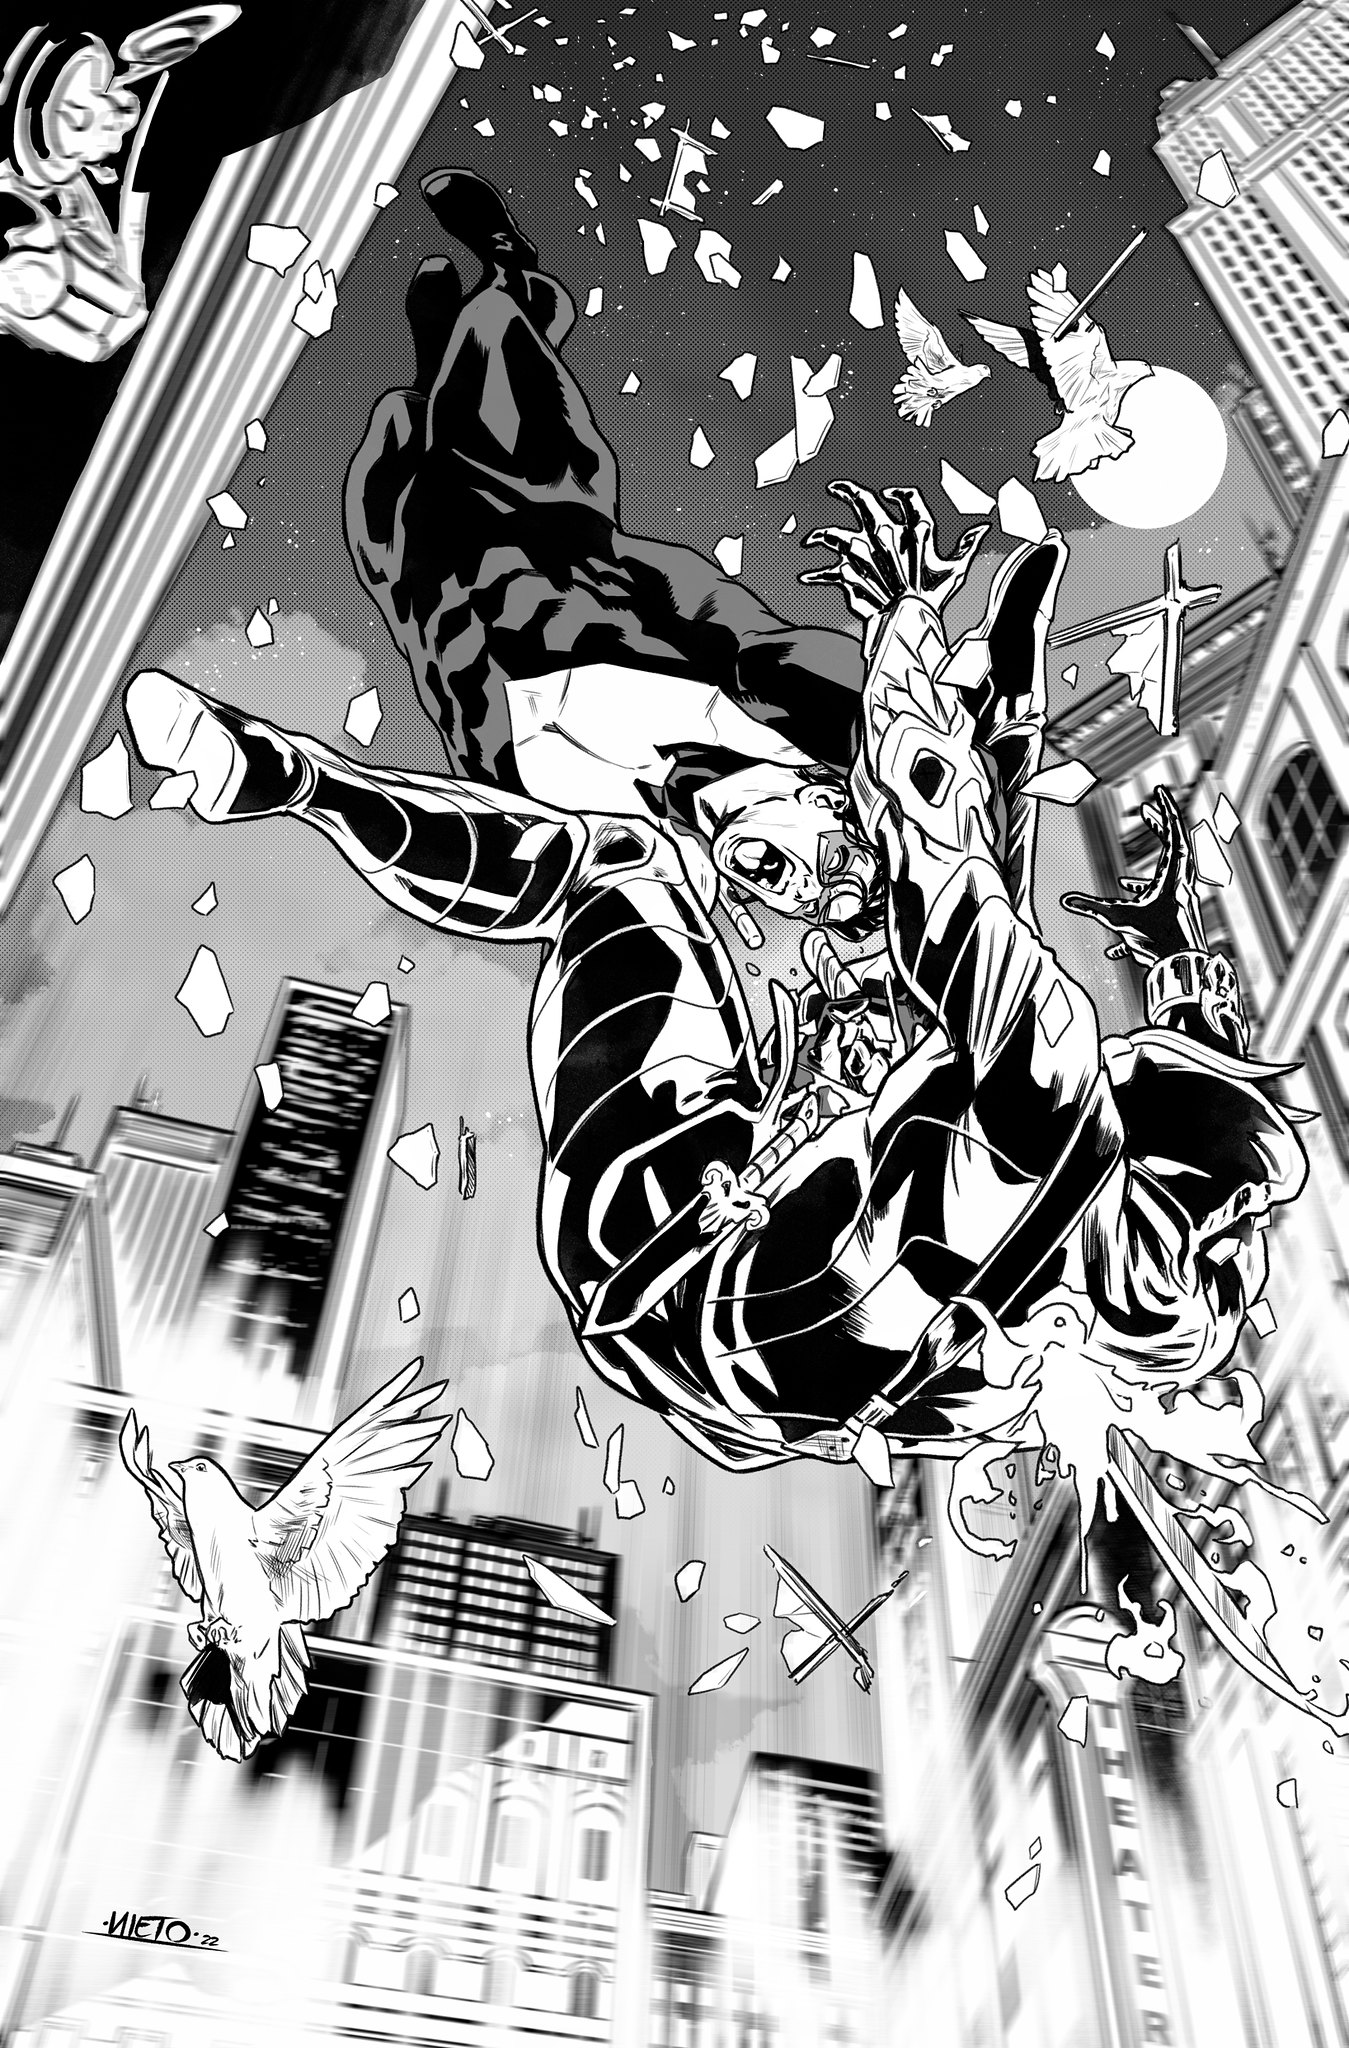 NIGHTWING_ISSUE8_PAGE6_INKS_FINAL2